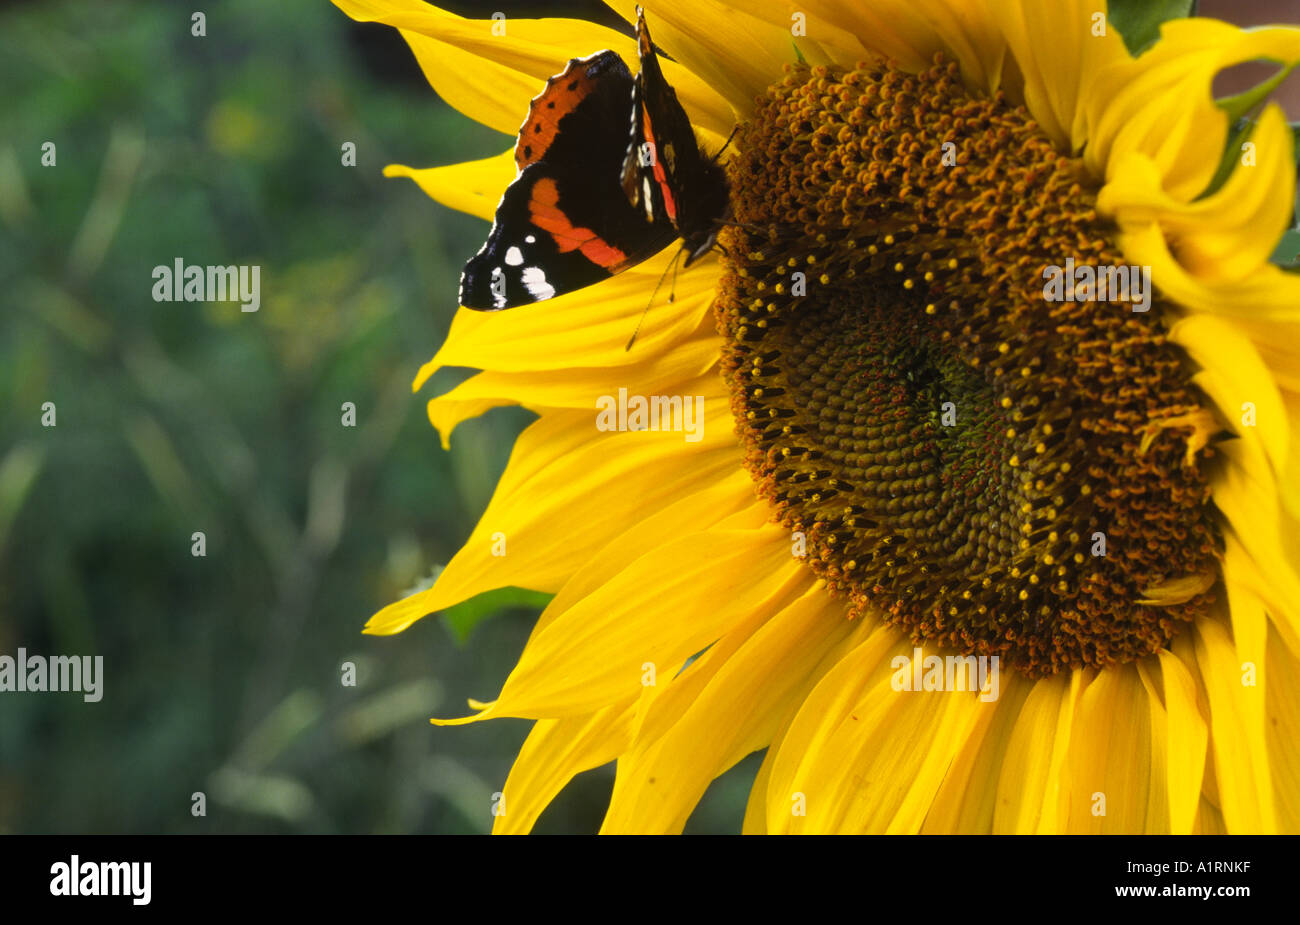 Farfalle Red admiral Foto Stock